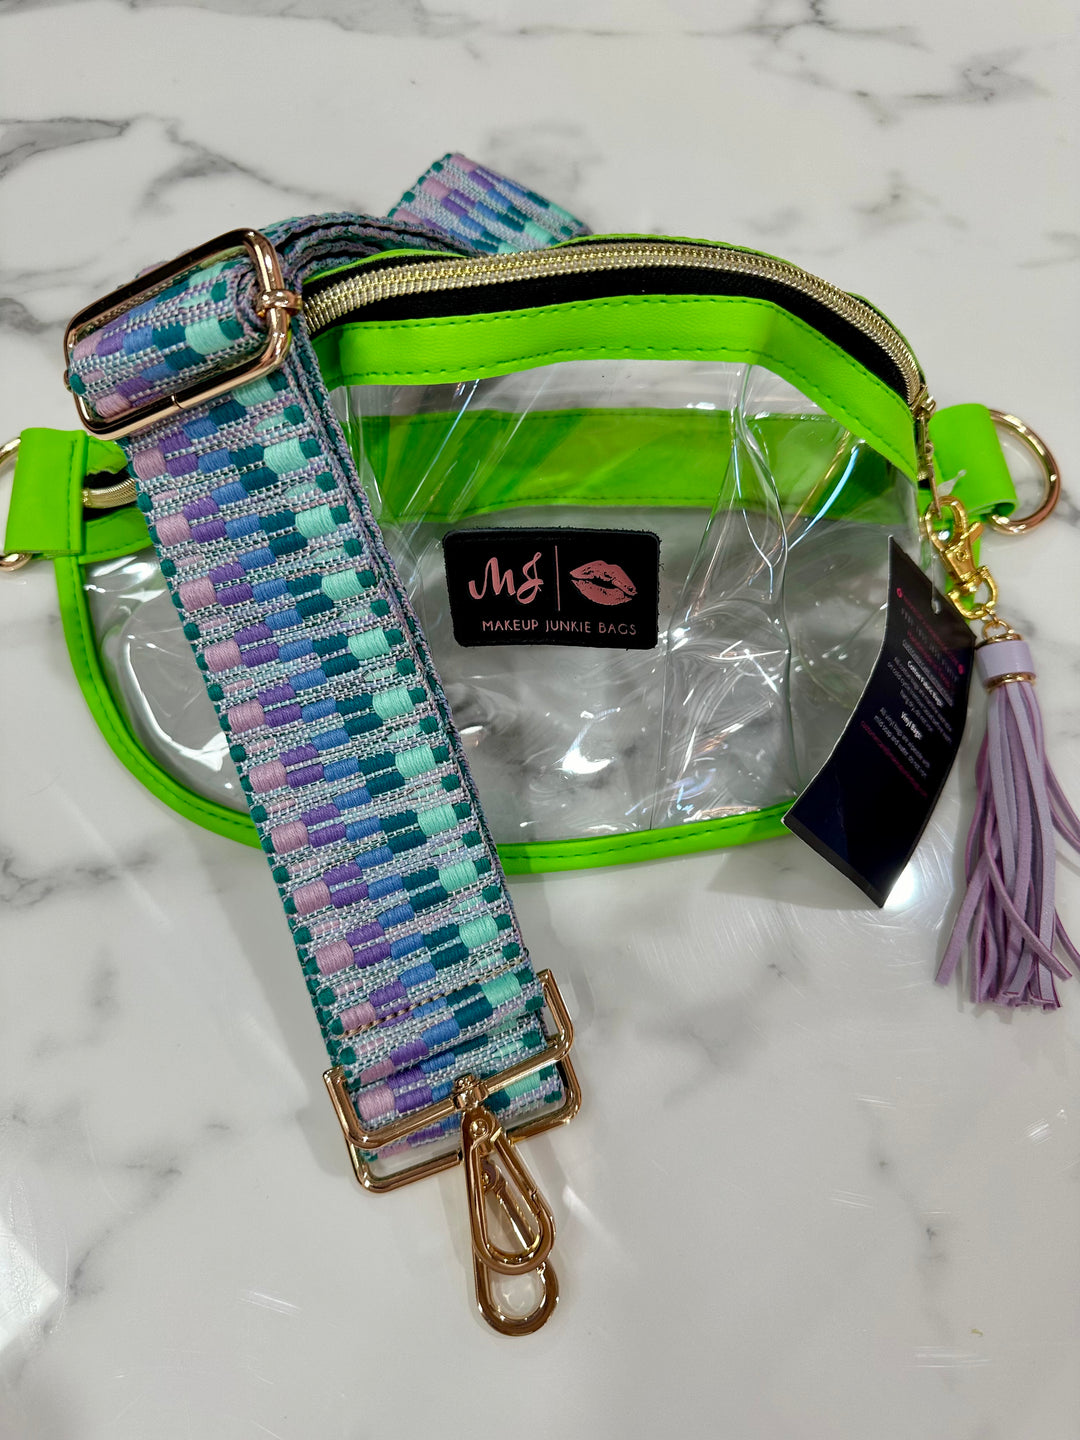 Makeup Junkie Bags - In the Clear Lime Green Sidekick with embroidered Strap - [Pre-Order]